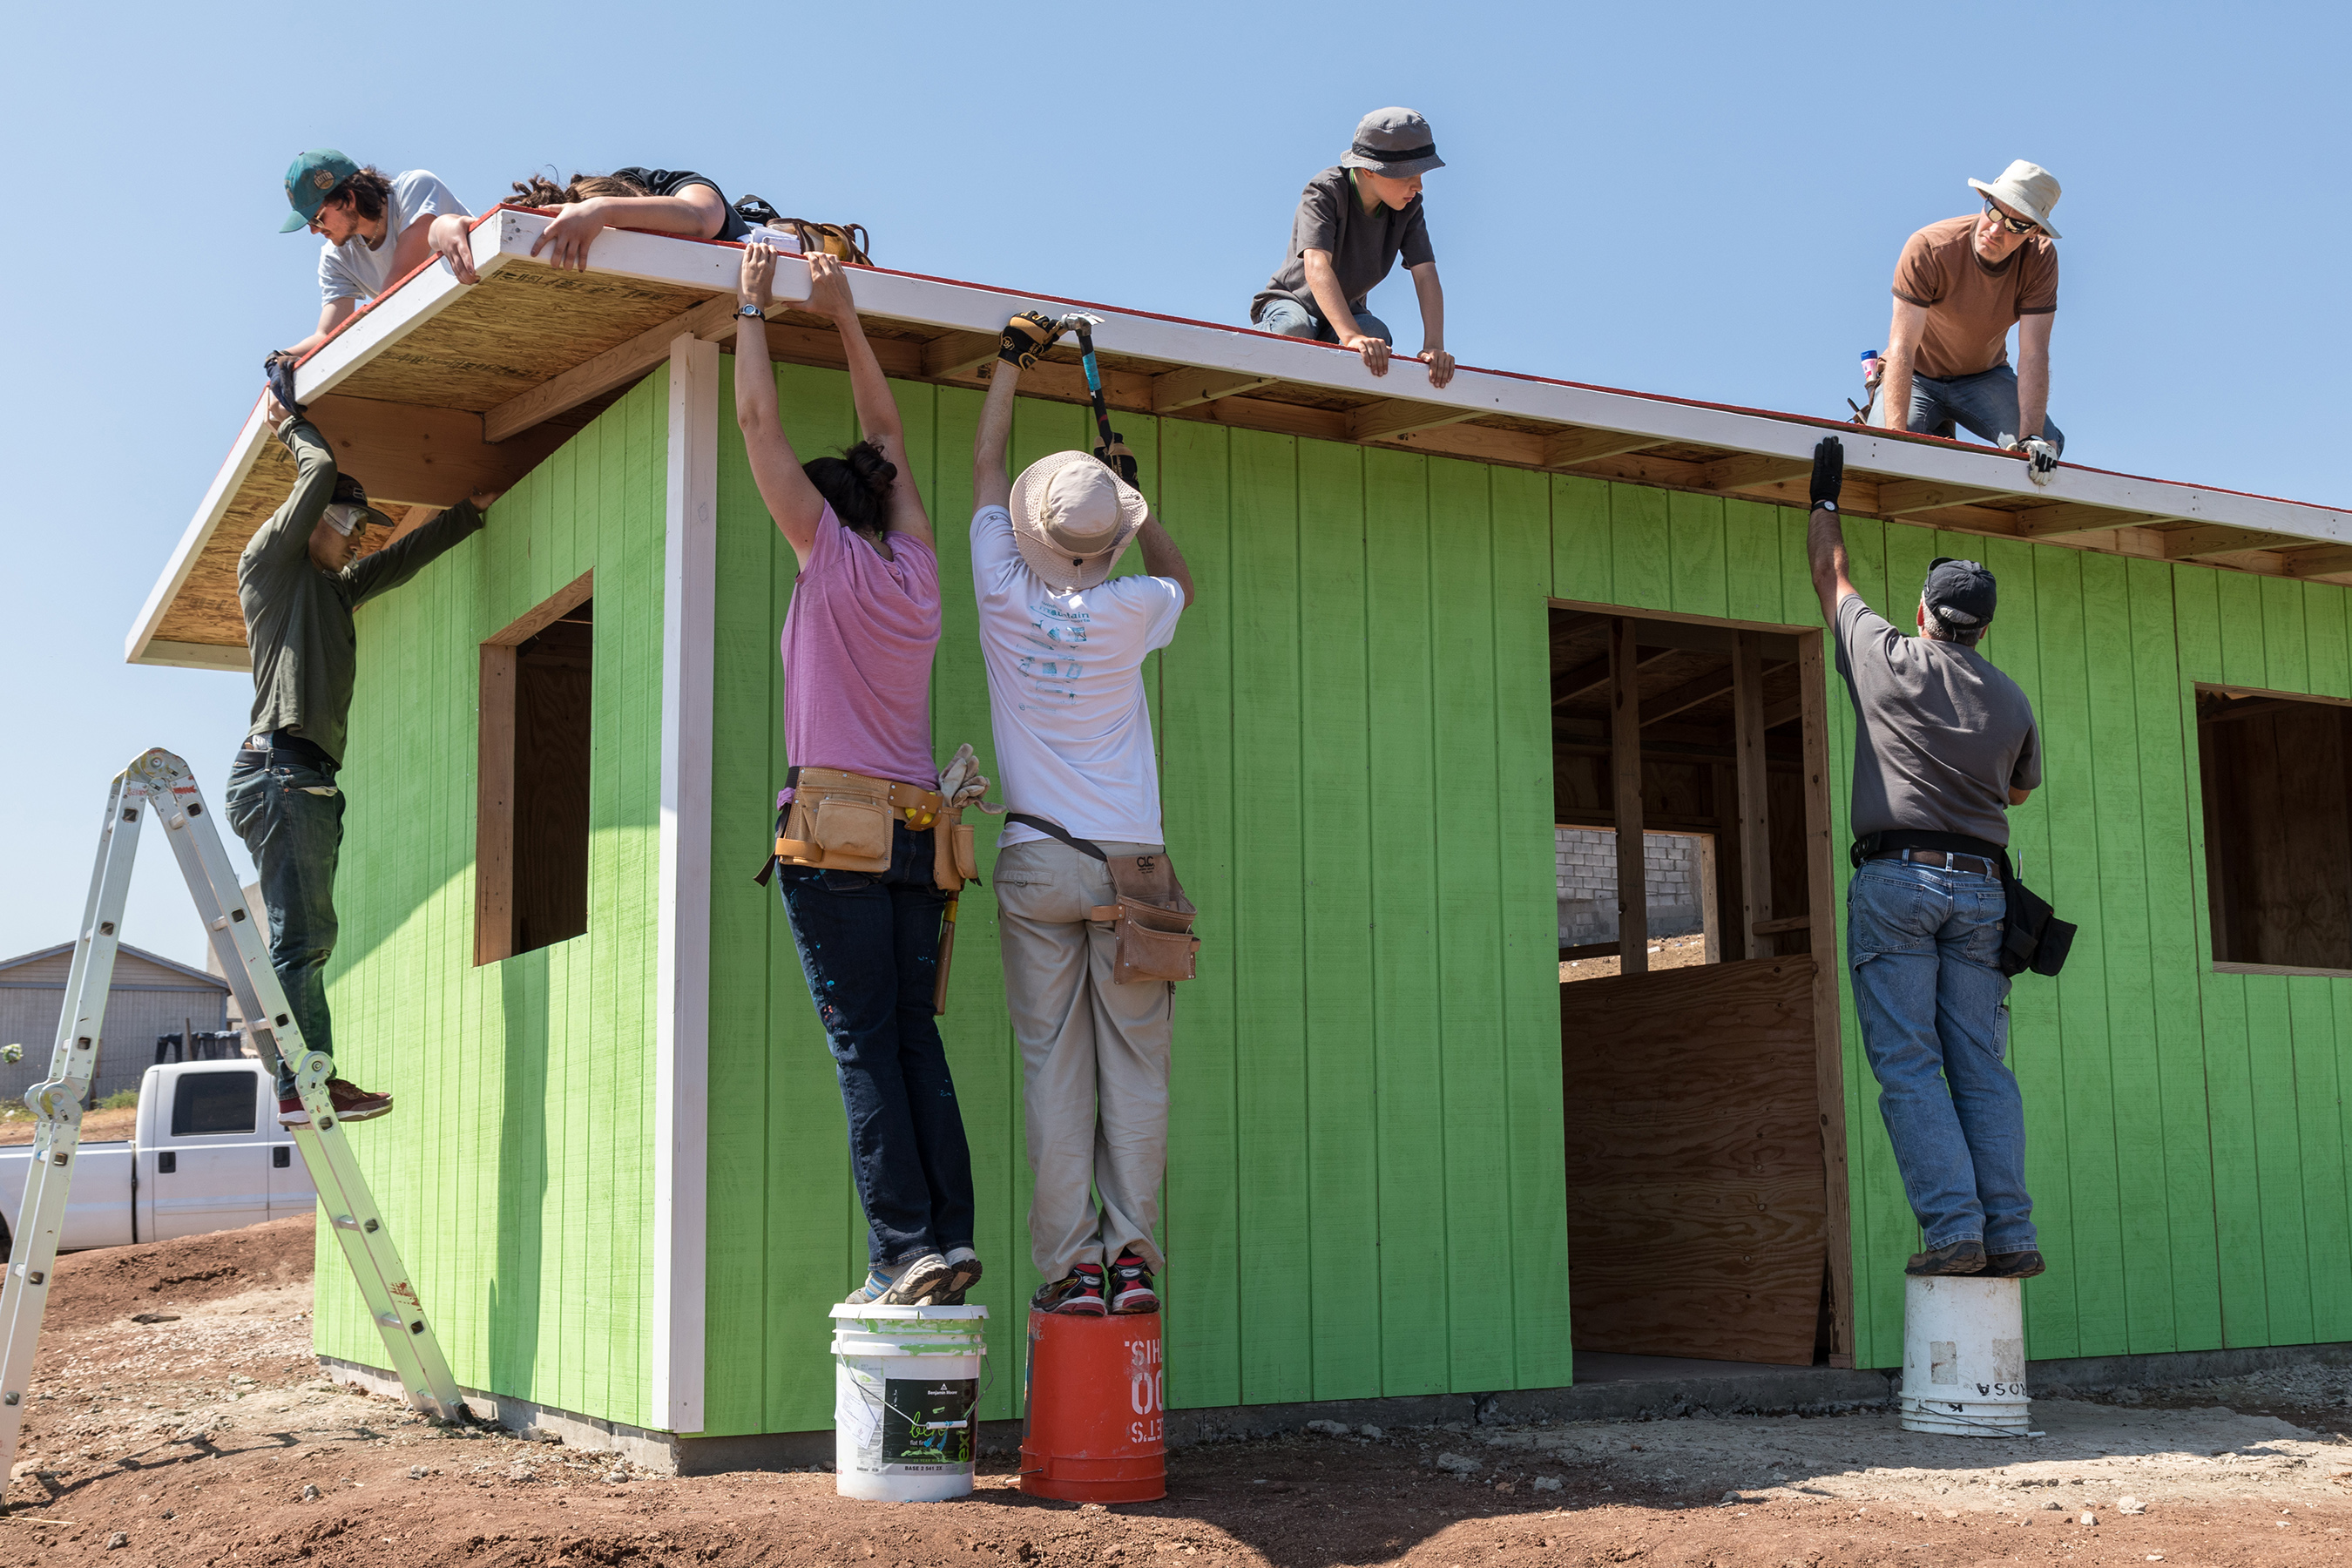 DOXA takes Group to Tijuana for House-Building Trip this Easter